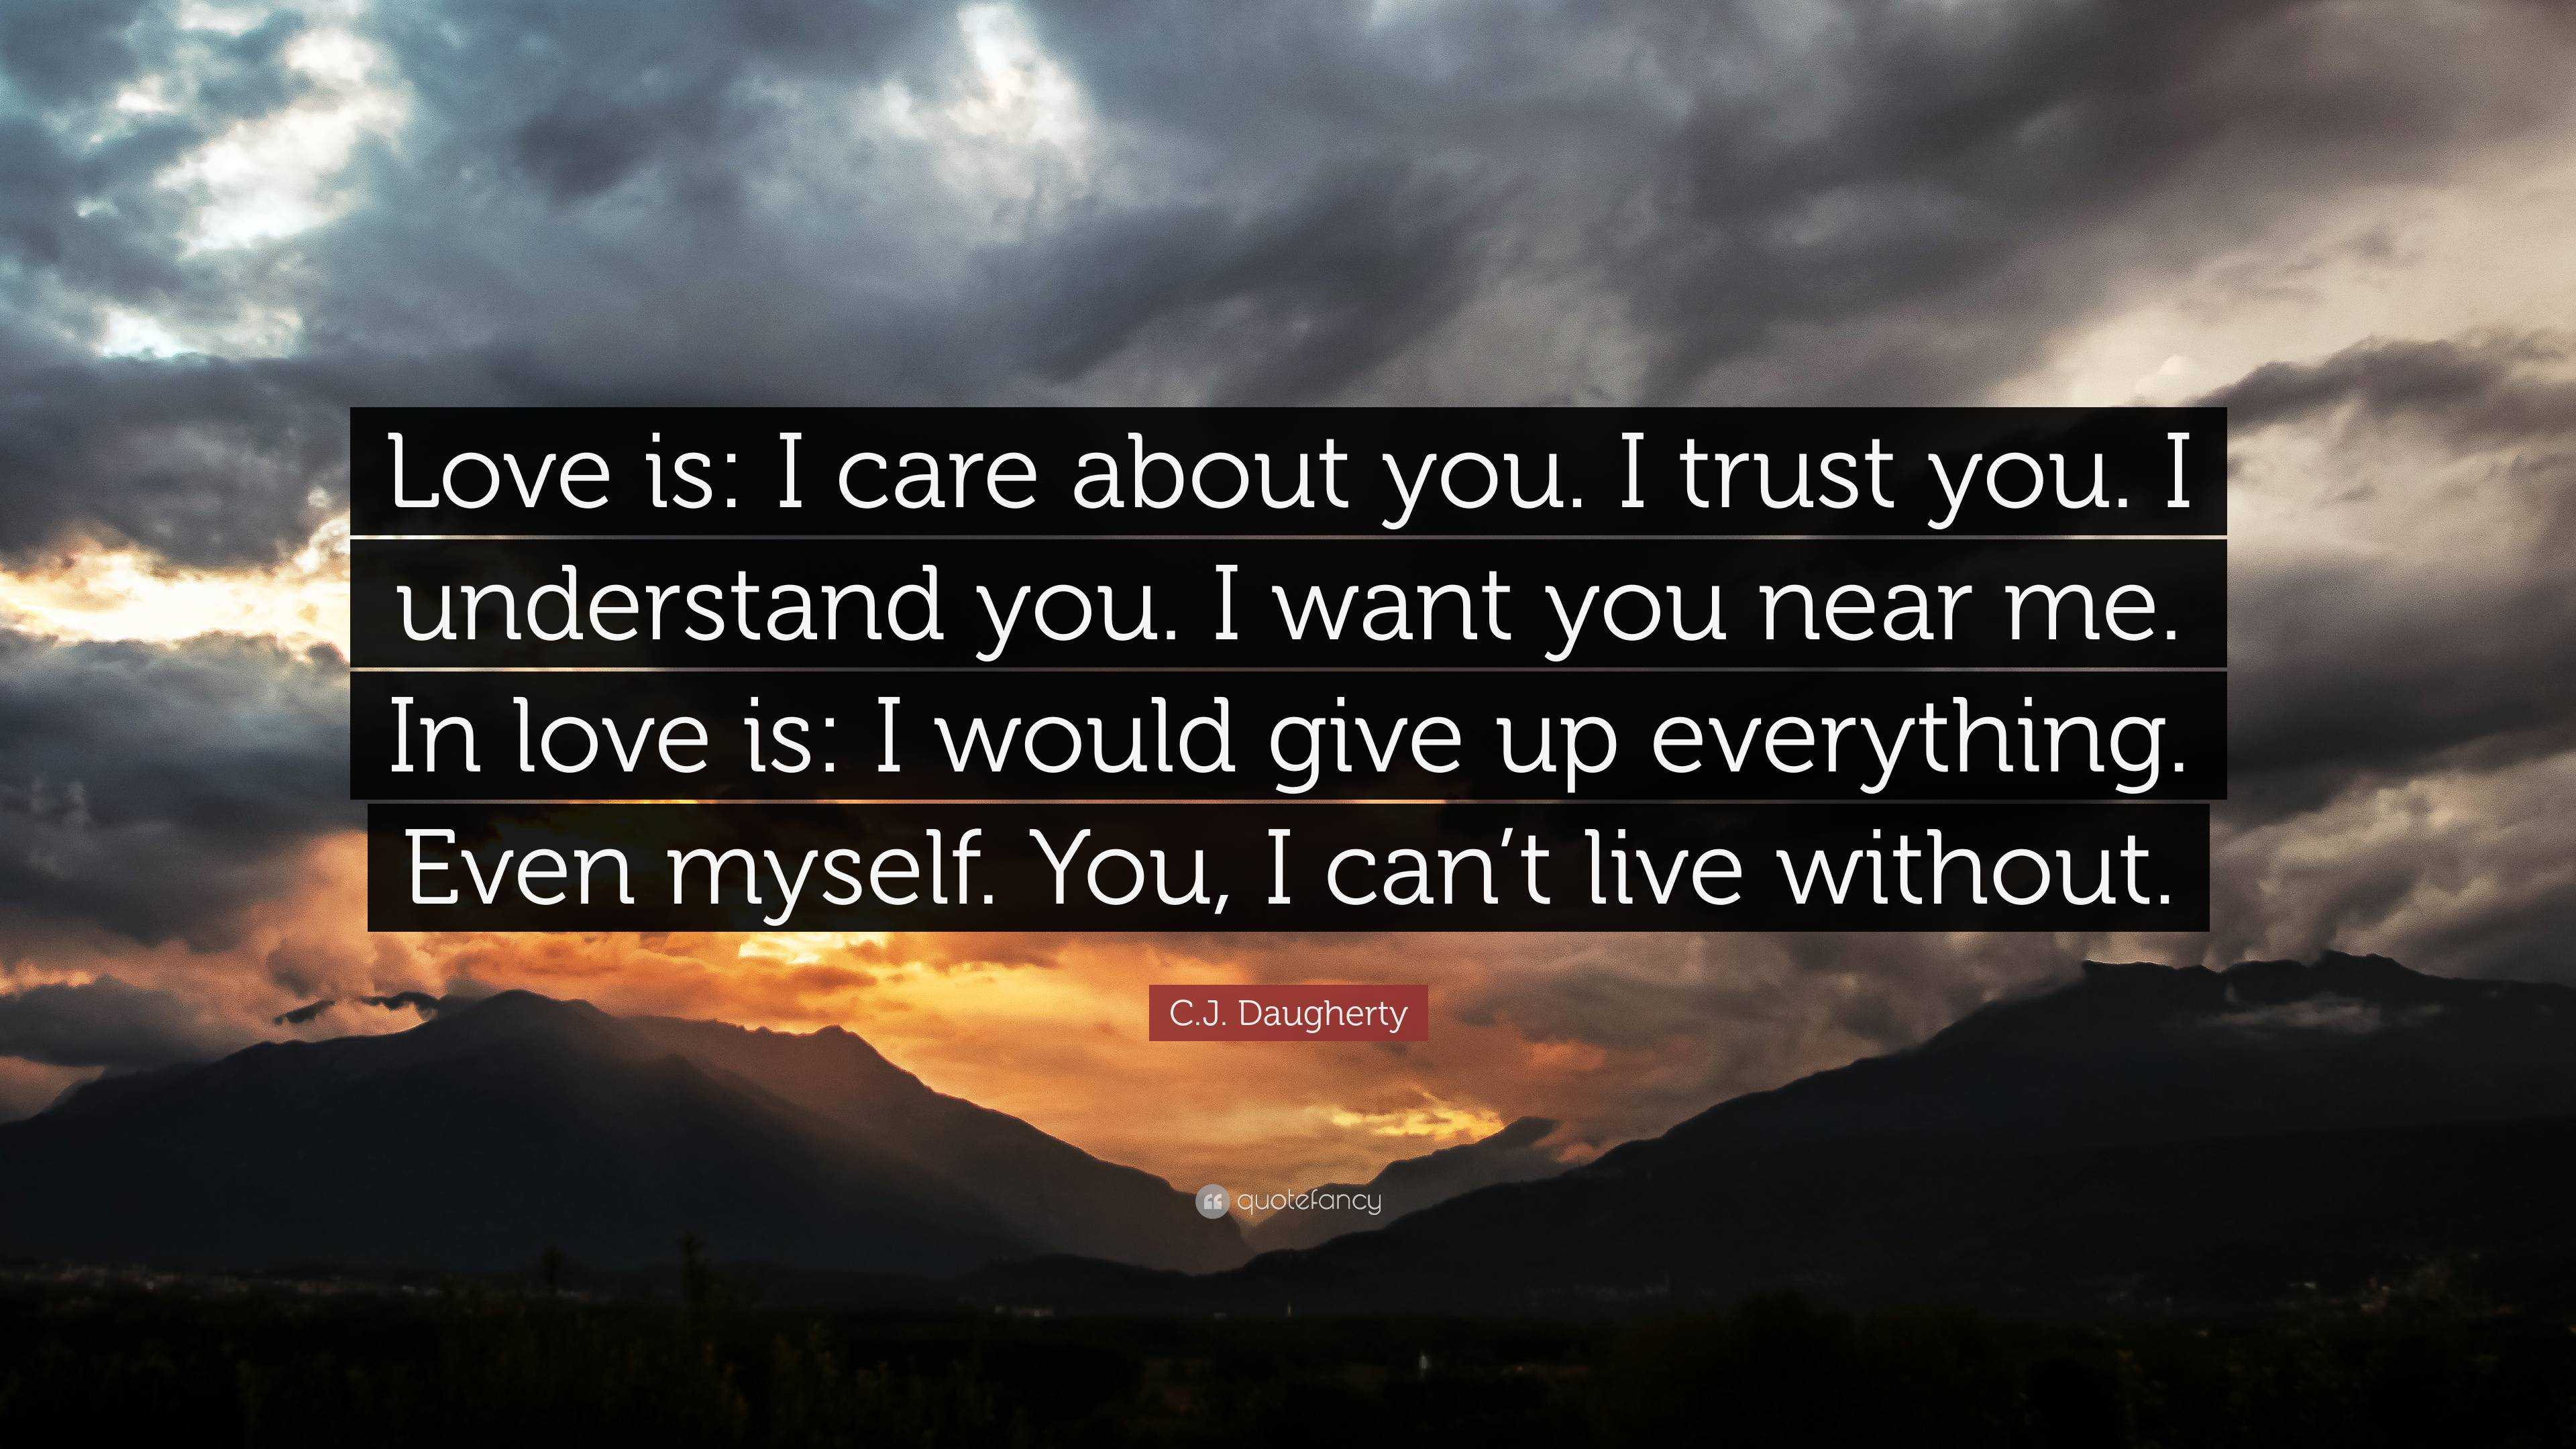 C.J. Daugherty Quote: “Love is: I care about you. I trust you. I understand  you. I want you near me. In love is: I would give up everything. Ev”